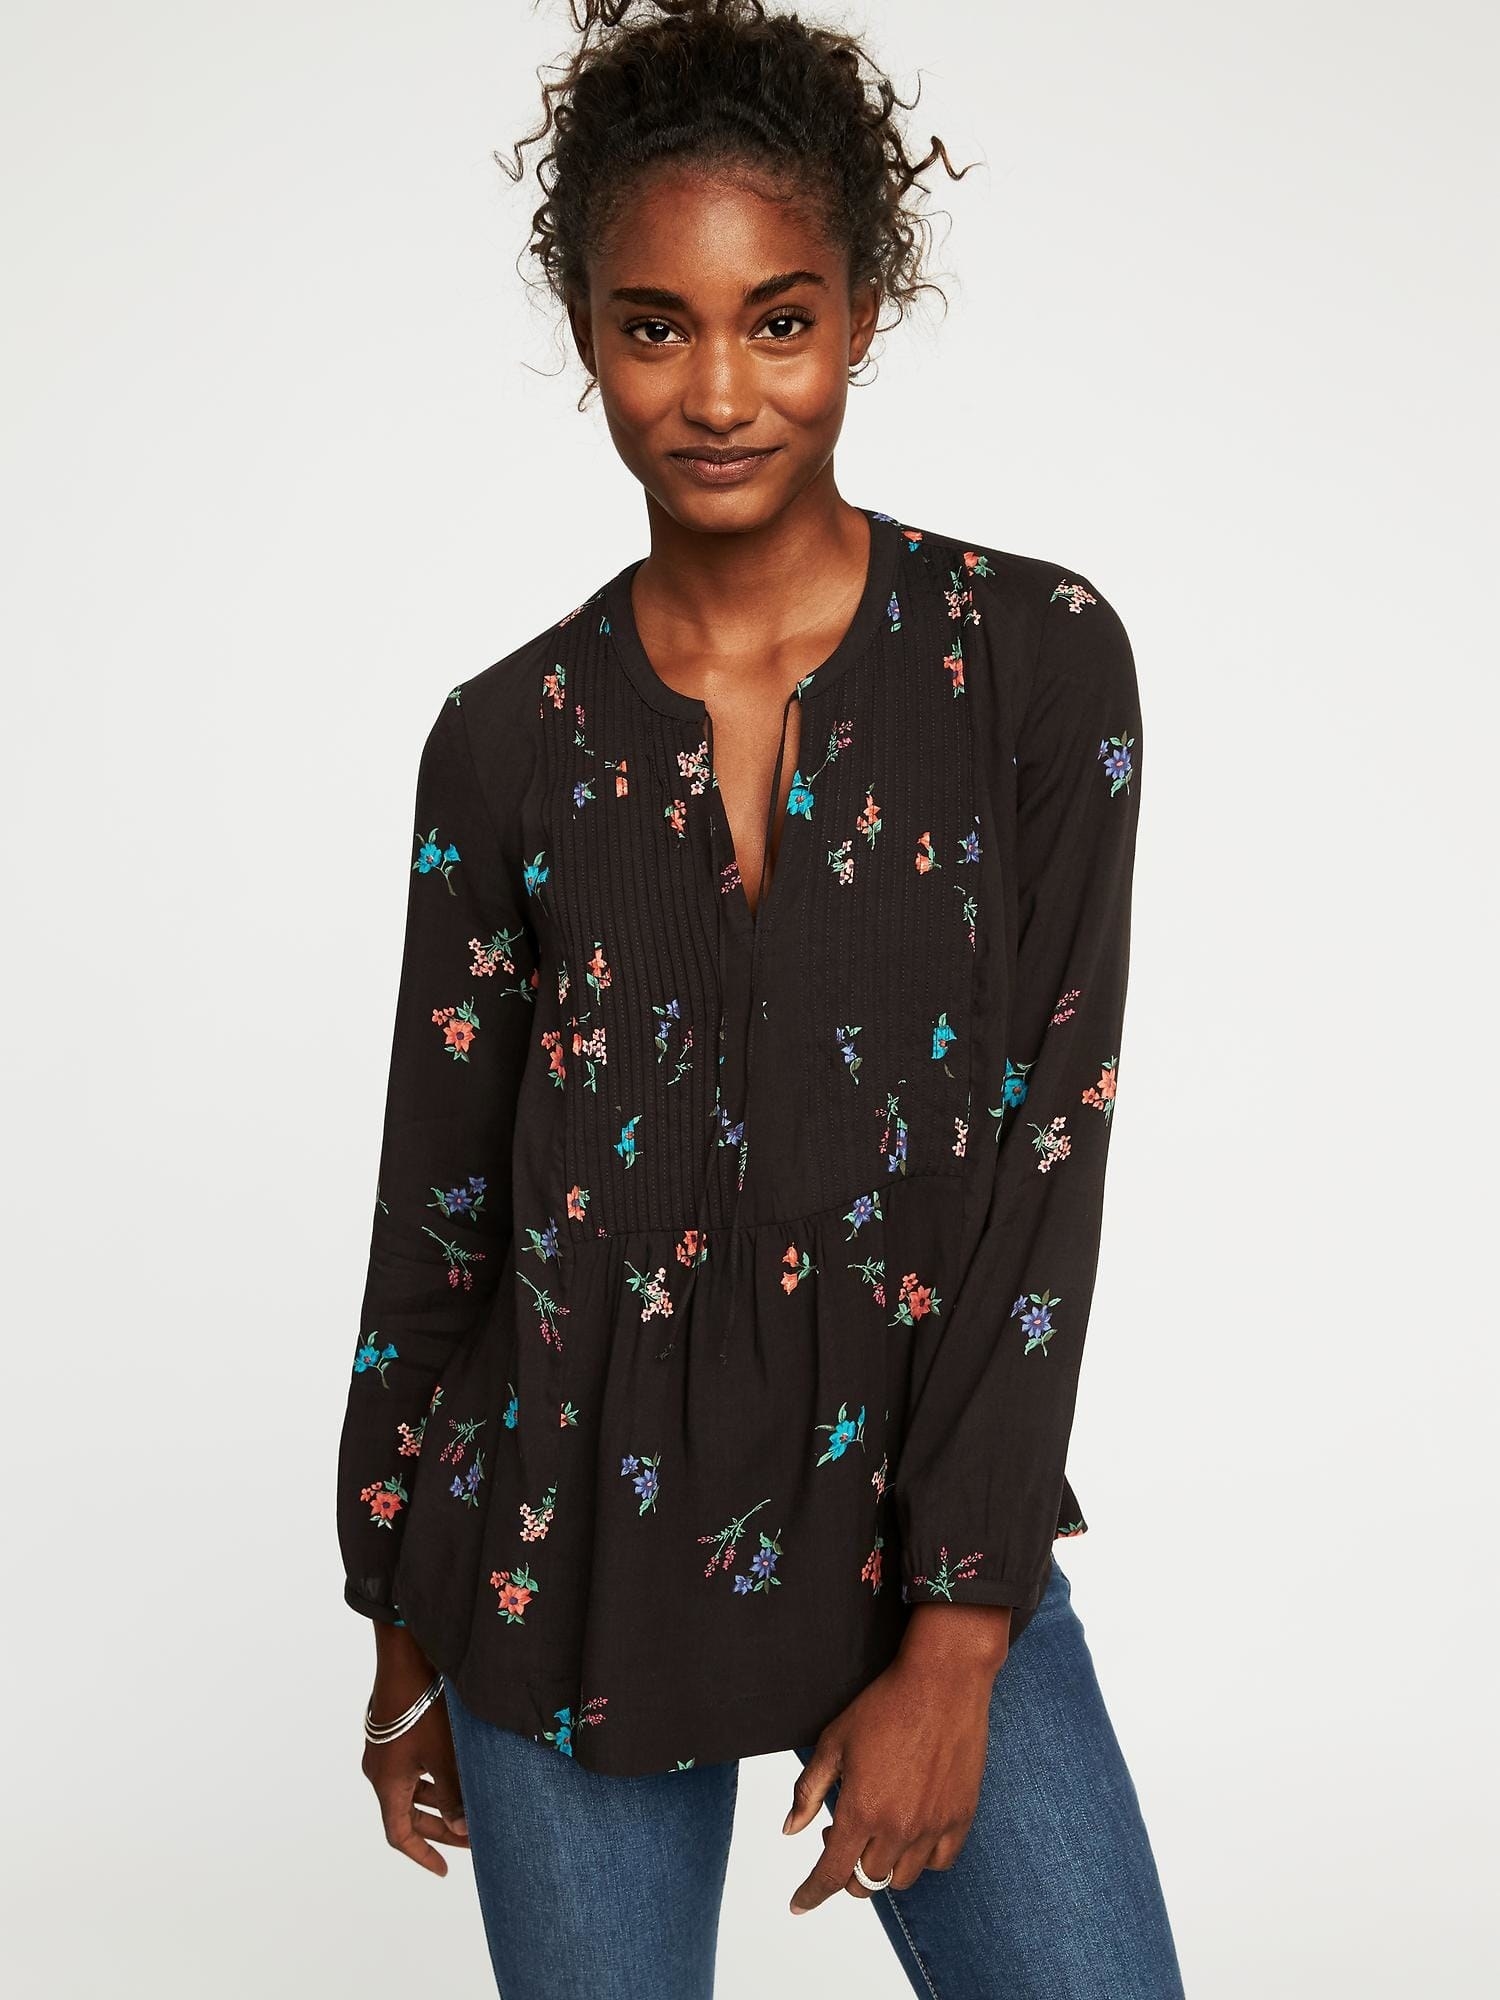 47 Things From Old Navy You'll Want To Wear This Fall